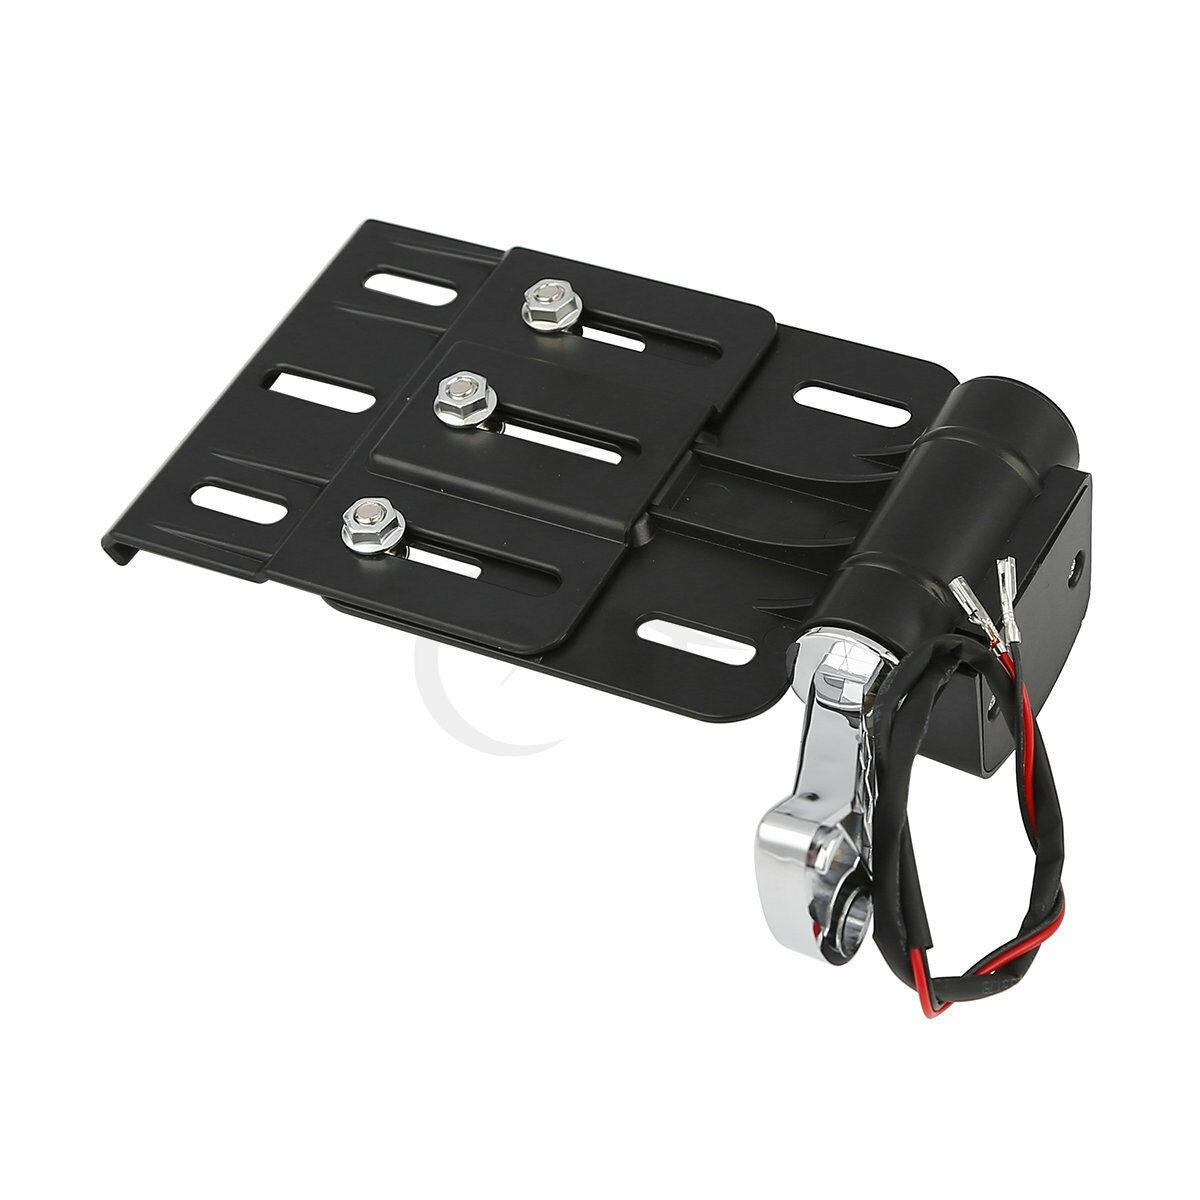 Motor ABS LED Light Side Mount License Plate Fit For Harley Sportster 883 XL883 - Moto Life Products